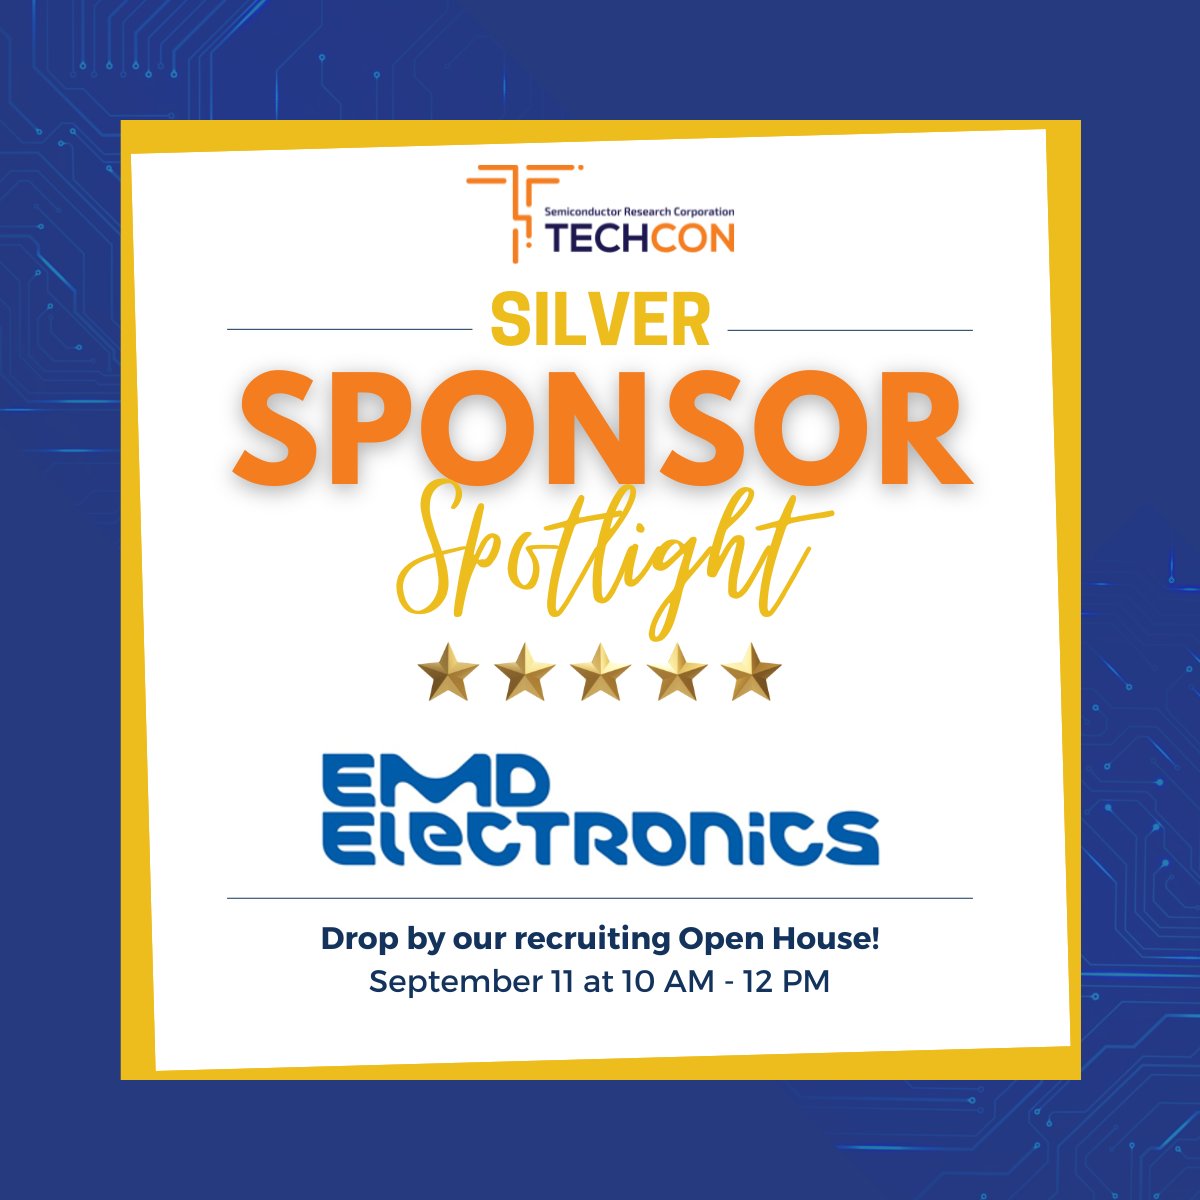 ✨ Sponsor Spotlight ✨ As we conclude our second week of Sponsor Spotlights, we gratefully recognize @EMD_Electronics as a SILVER  #CareerConnections sponsor. Visit their Recruiting Open House at #TECHCON2023 on 9/11 at 10 AM. Learn more: emdgroup.com/en